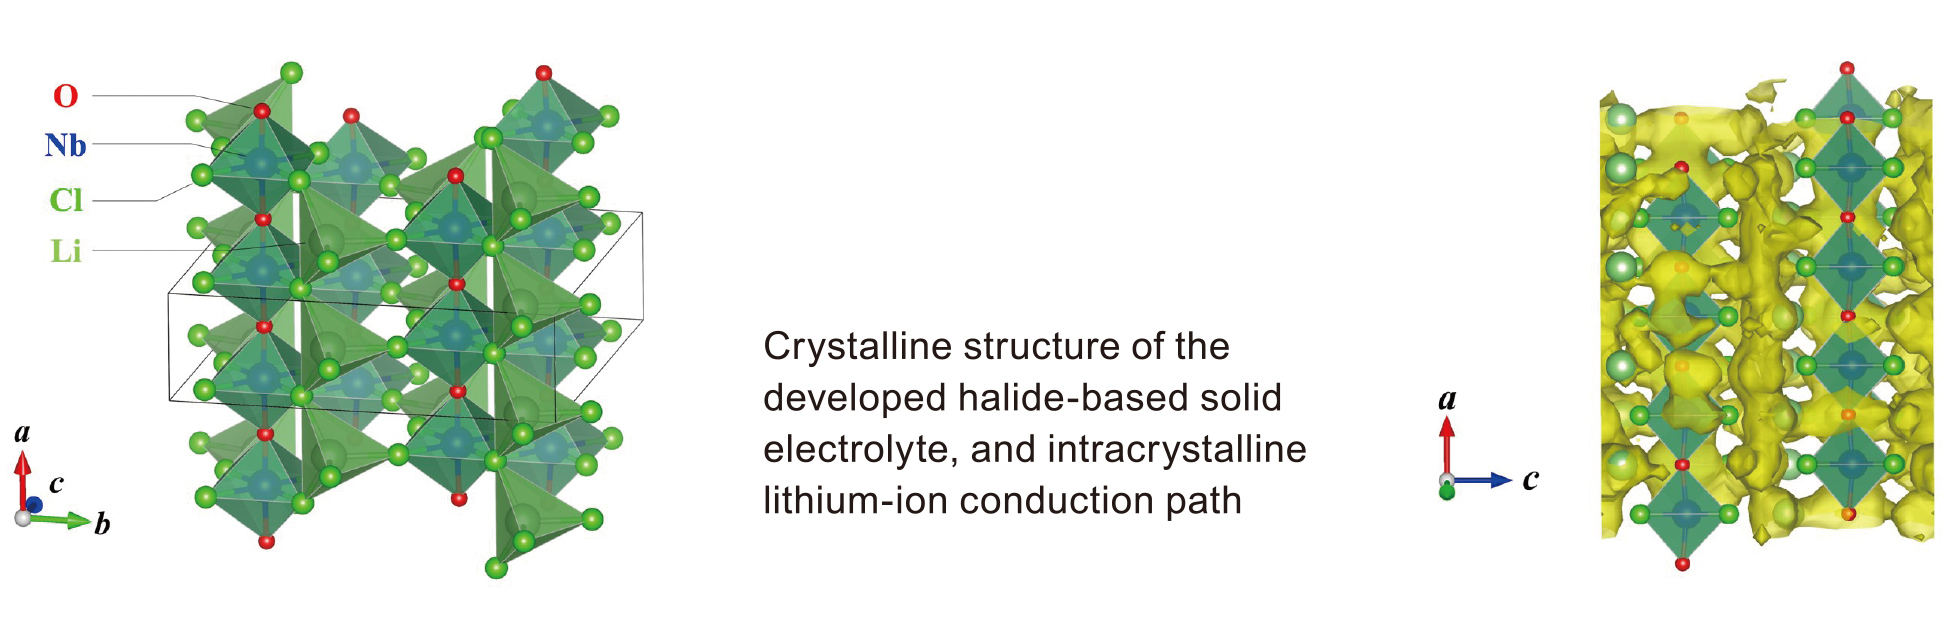 This is a diagram showing the crystal structure of the developed solid electrolyte and the lithium conduction path in the crystal.